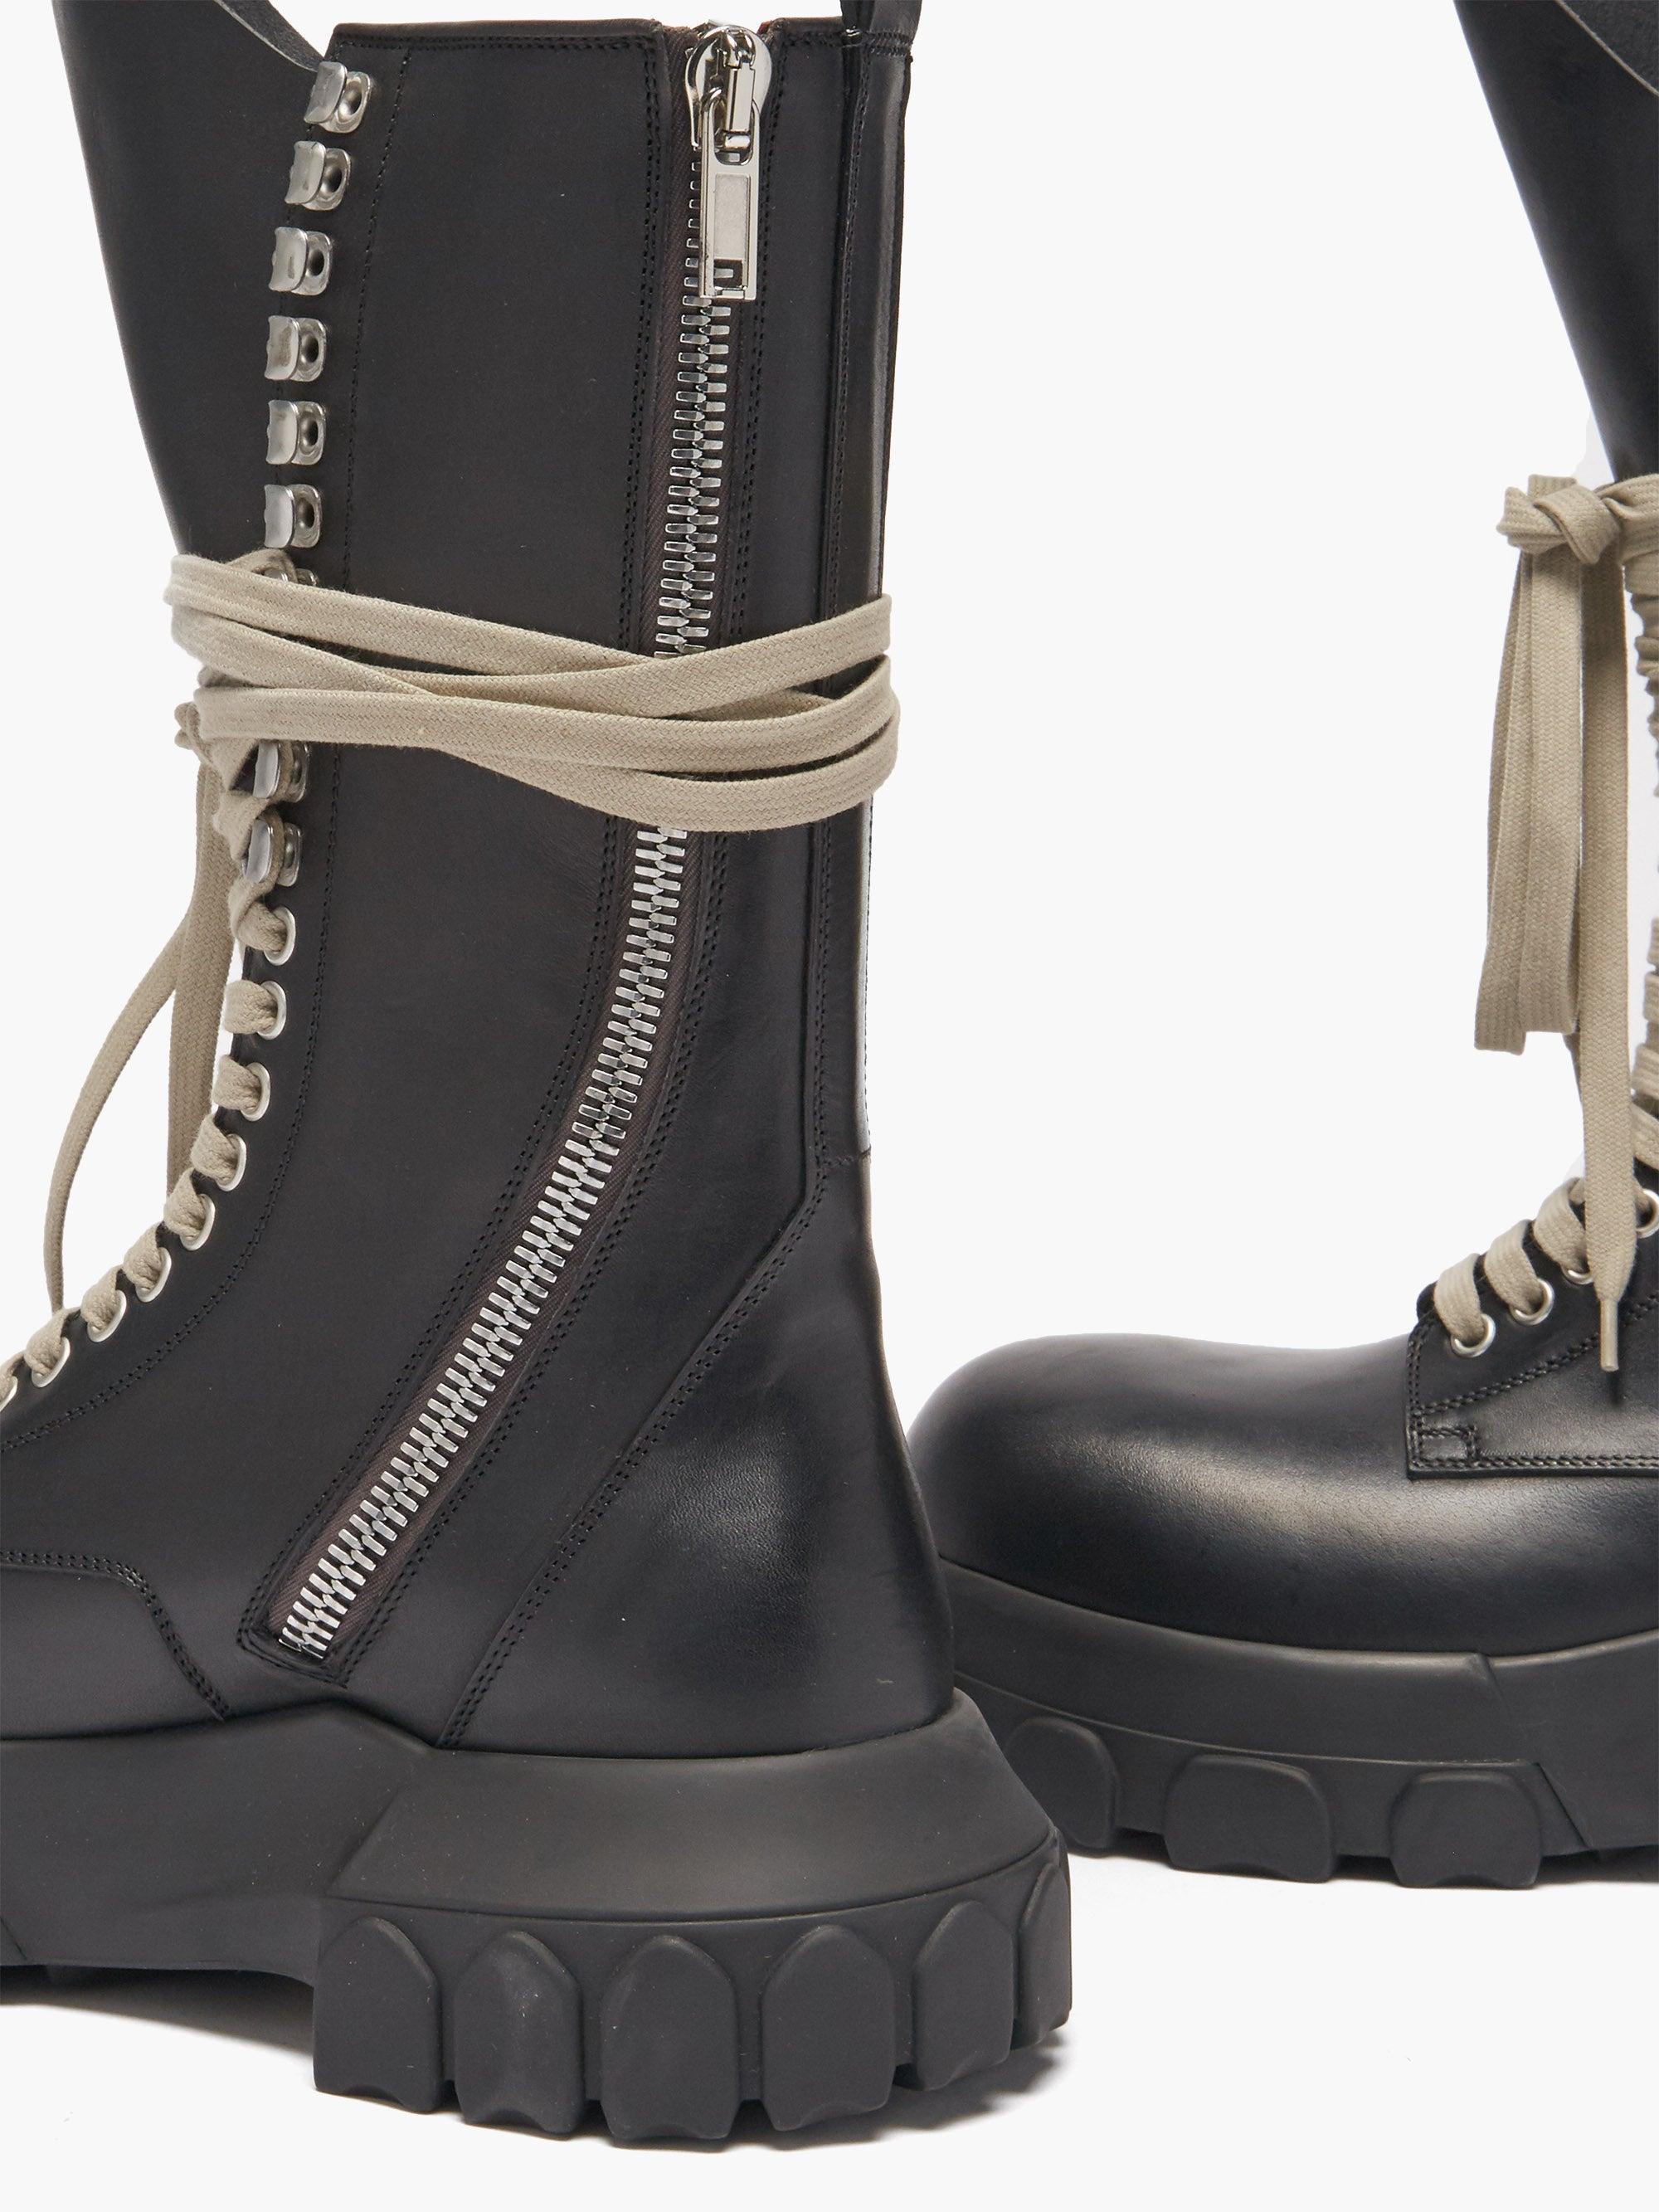 Rick Owens Bozo Tractor Leather Calf-high Boots in Black | Lyst